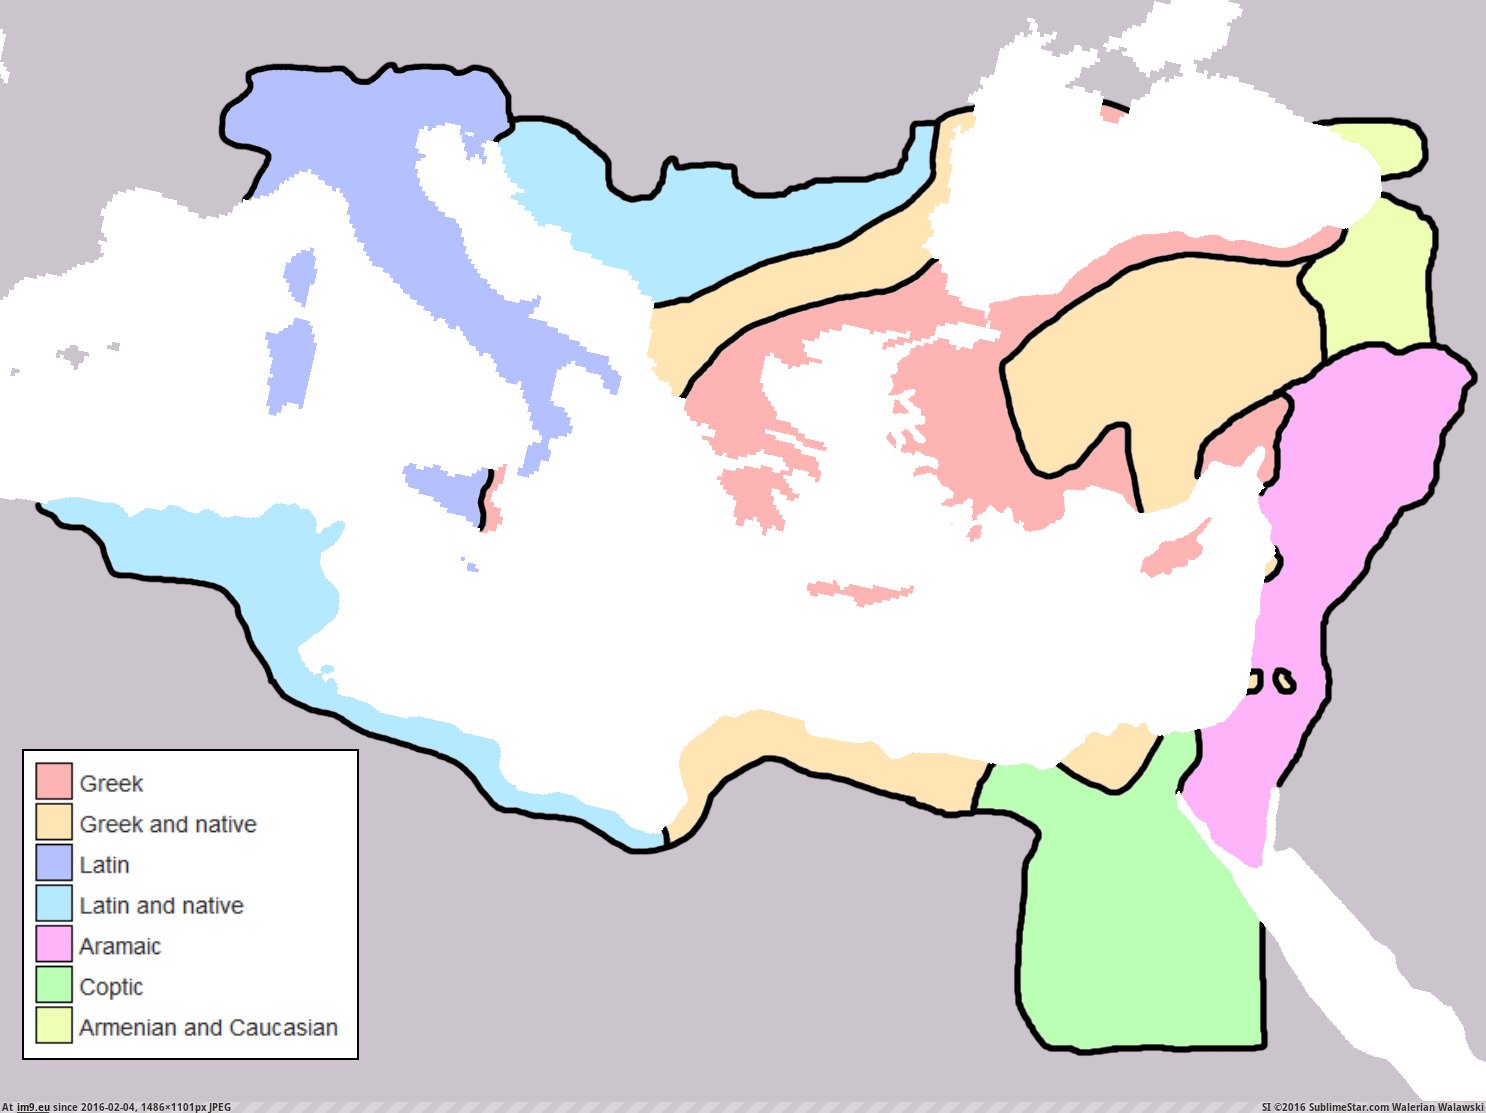 [Mapporn] Map of the (alleged) linguistic divisions of the Byzantine Empire under Justinian I c.560CE [1486x1101] (in My r/MAPS favs)